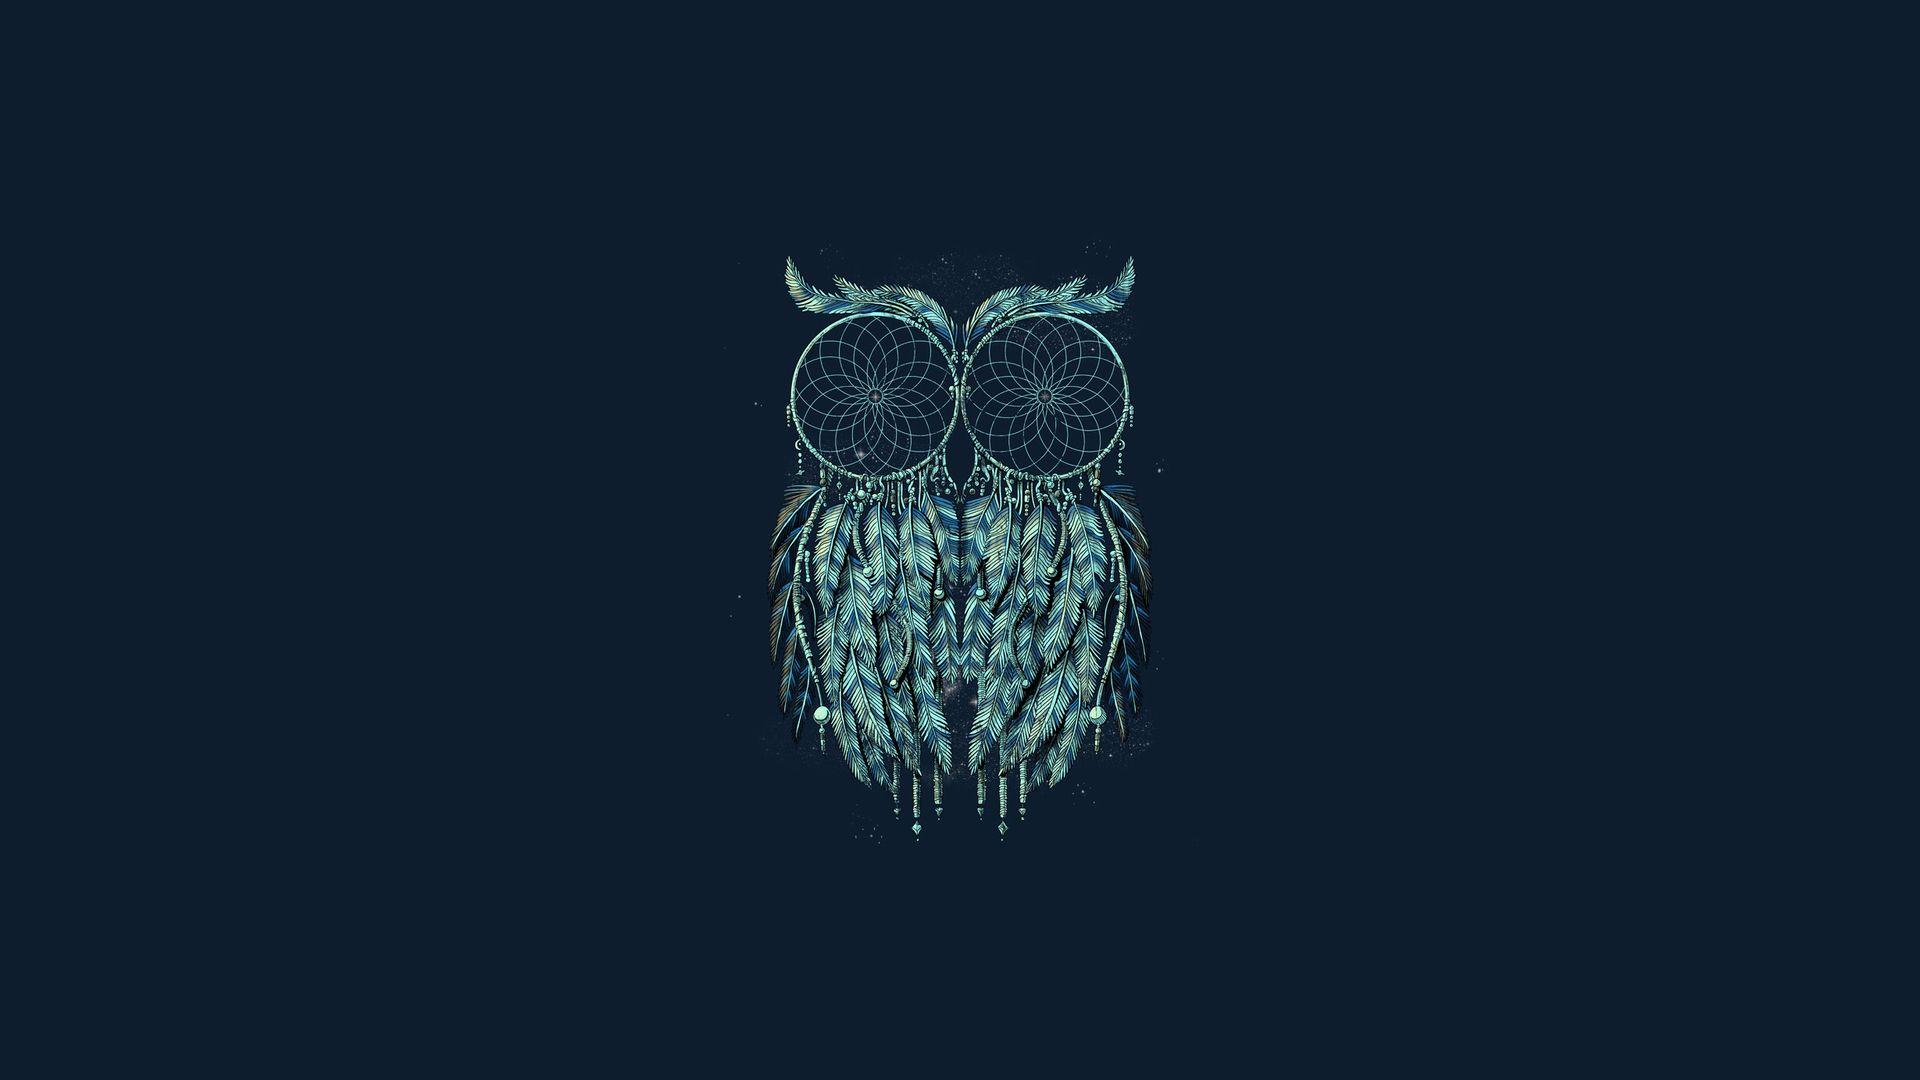 Wallpaper Hd Android Owl